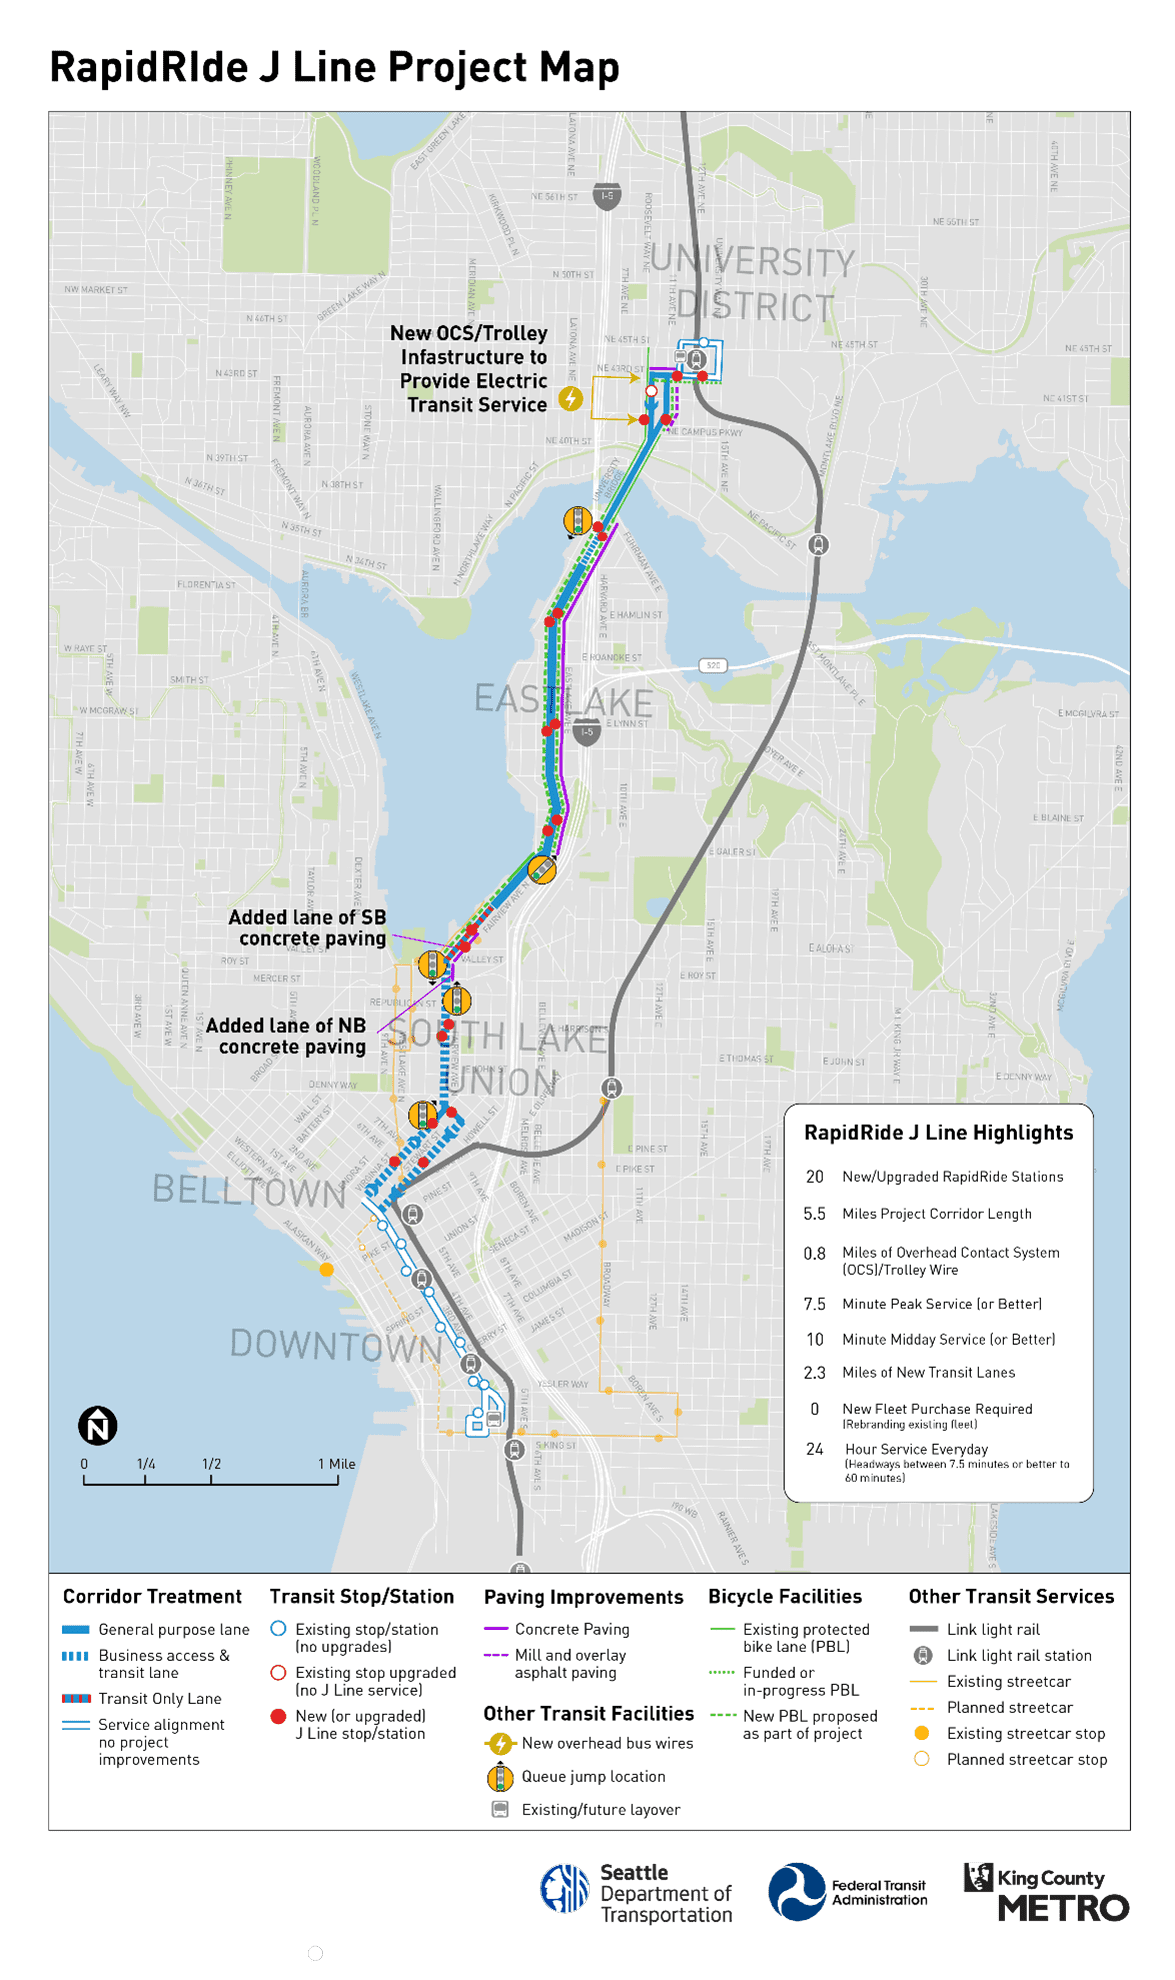 Map showing the route of the future project area. Shows several areas of Seattle, including University District, Eastlake, South Lake Union, Belltown, Downtown.